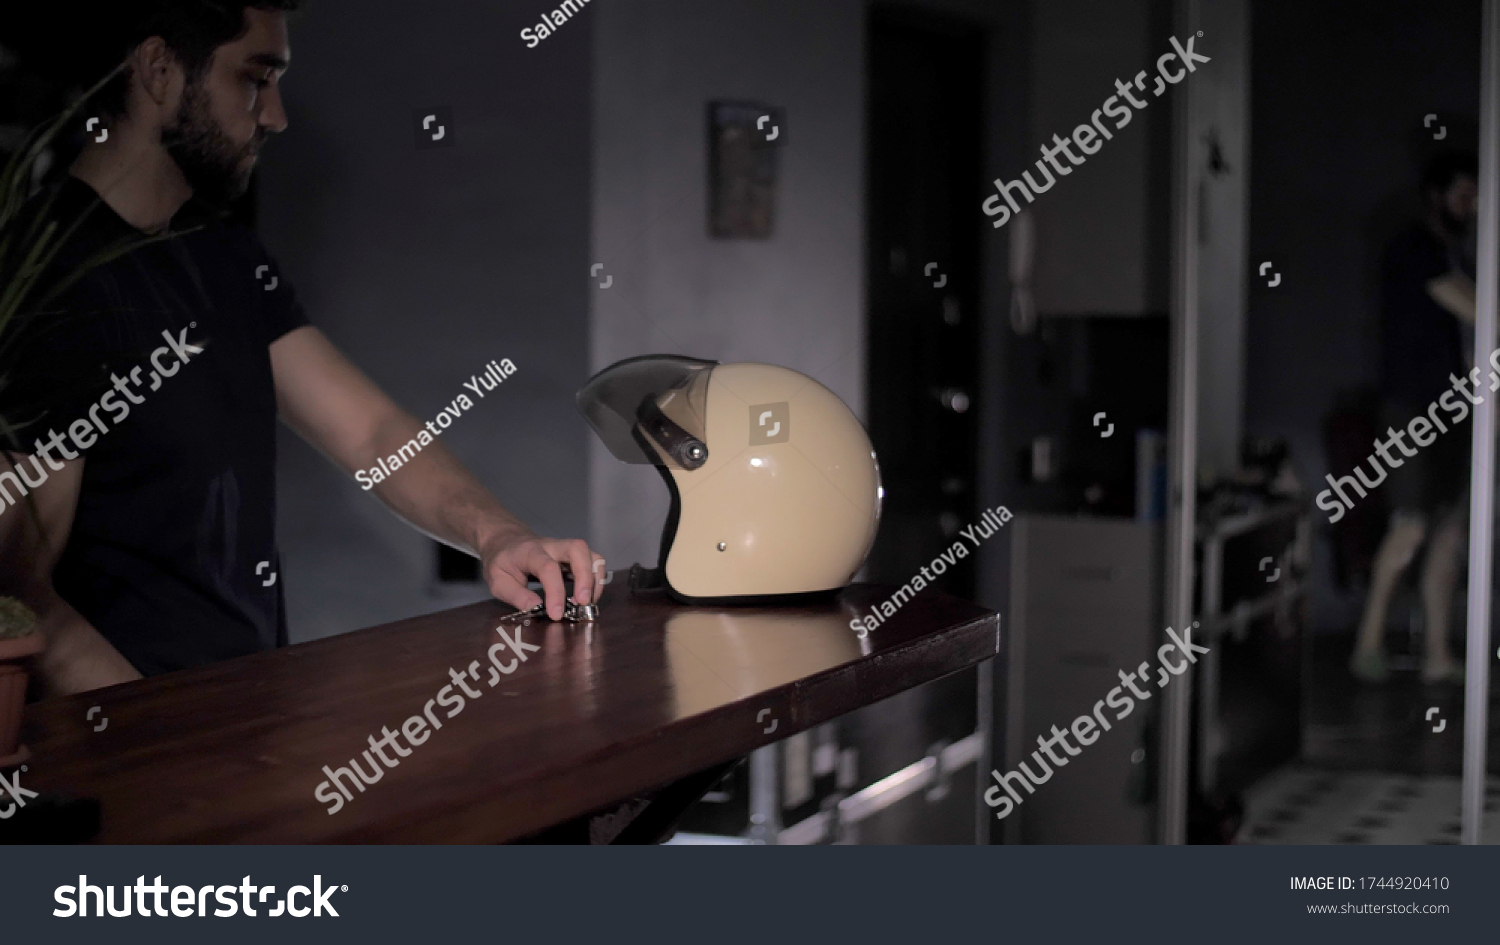 On the bar is a motorcycle helmet and keys. Biker takes a motorcycle helmet and keys for a motorcycle from a bar counter and sets off on a journey. #1744920410